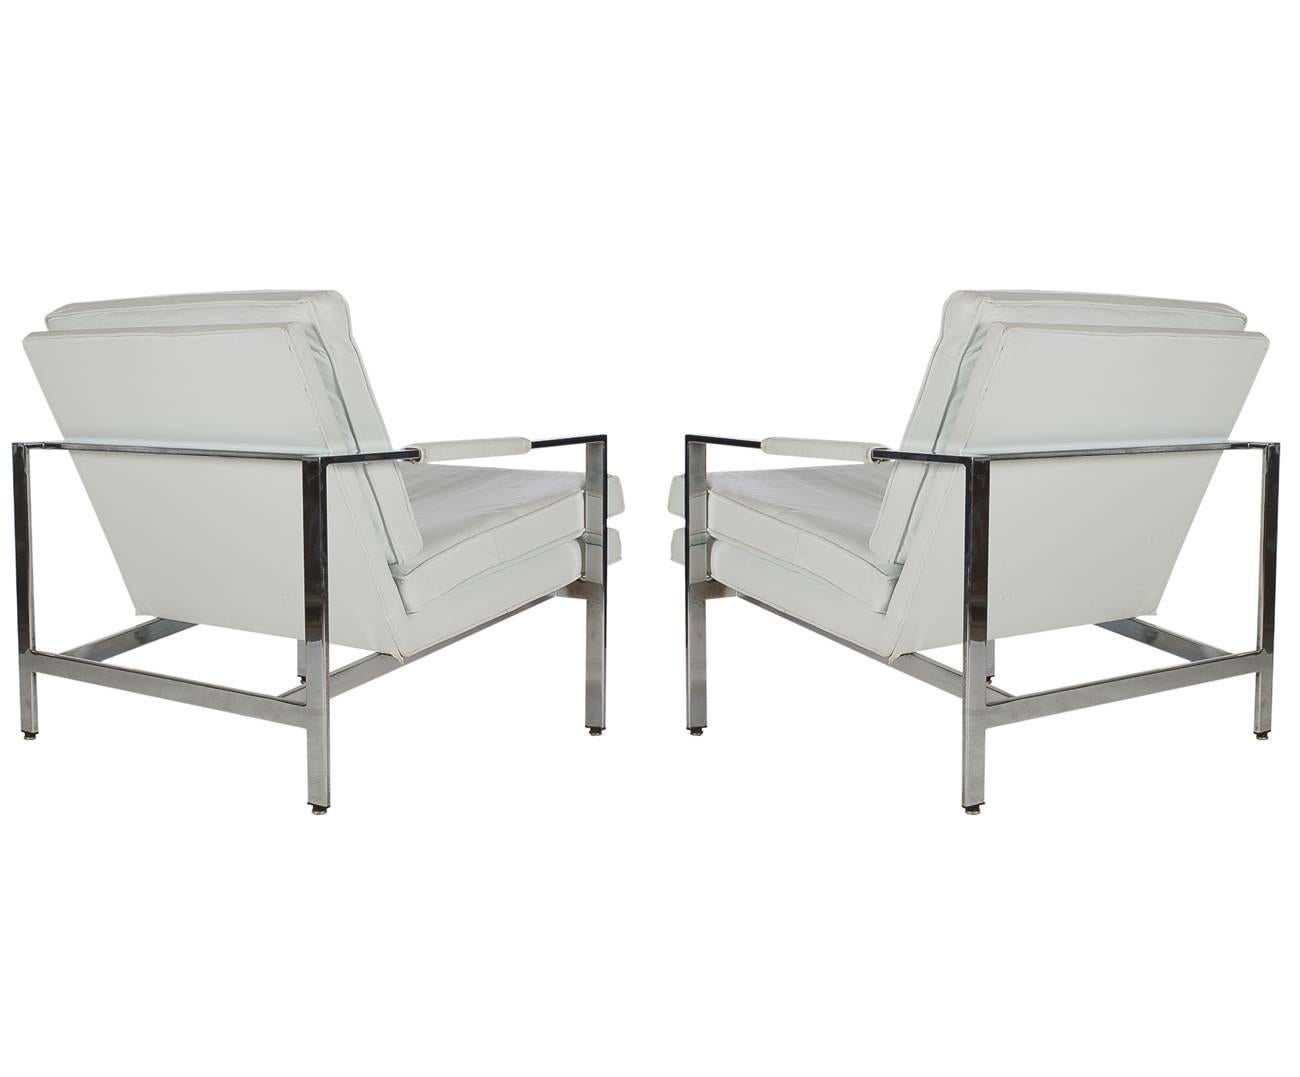 American Pair of Milo Baughman Mid-Century Modern Lounge Chairs in White and Chrome